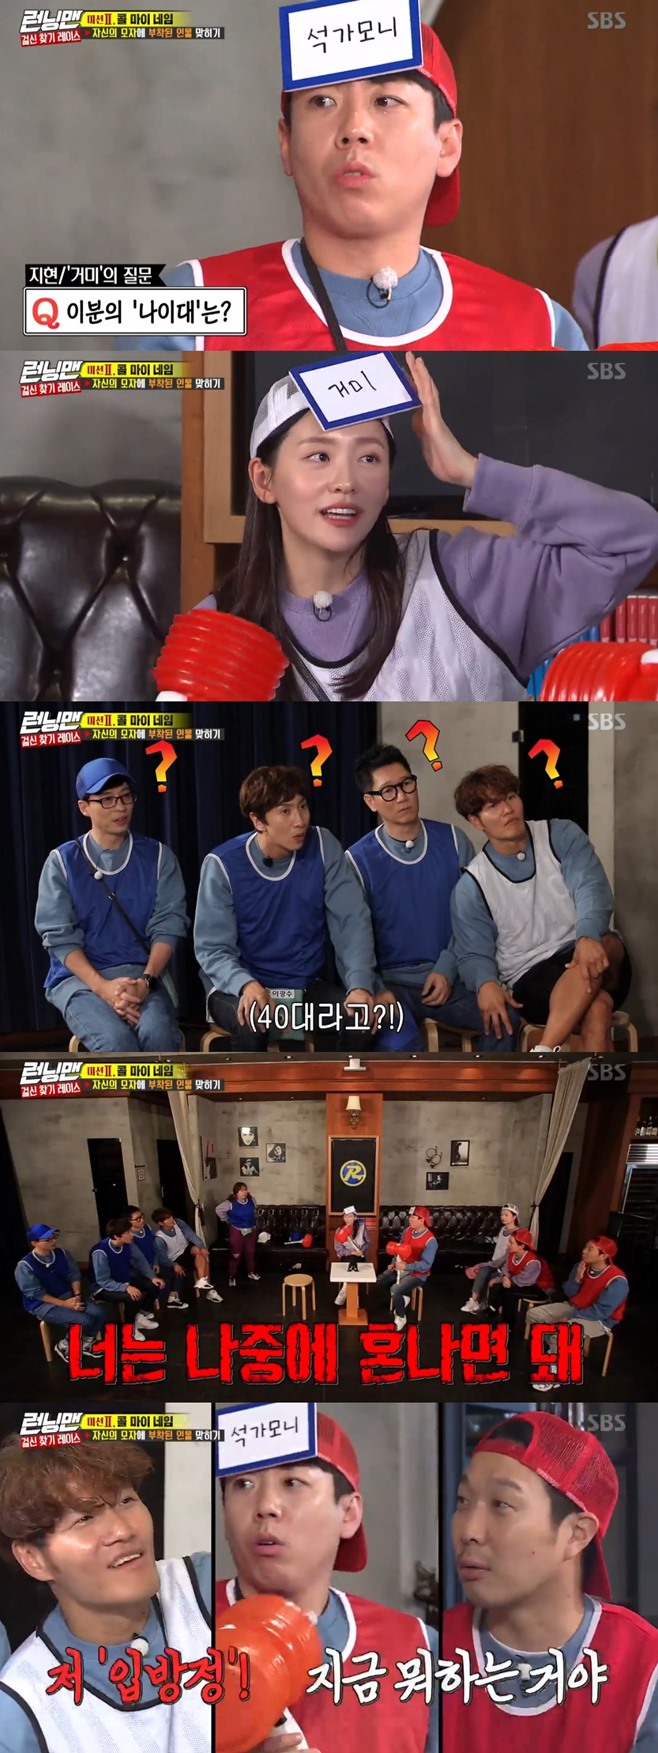 I am not sure about the remarks...Zheng Zheng apologizes after a sudden apologyRunning Man Yang Se-chan gives singer Spiders Age 40sI was beaten by a blow.In the SBS entertainment program Running Man broadcasted on the evening of the 3rd, it was shown that he was playing a character hit on his hat.On this day, Yang Se-chan attached the letter Sukgamoni and Park Ji-hyun attached the letter Spider to the hat.Among them, Park Ji-hyun asked Yang Se-chan, What is the Age of the Part? Yang Se-chan said,and shocked his attention.In the appearance of such a Yang Se-chan, the same team Haha voiced, You can get scolded later: Spiders current 39-year-old.Yang Se-chan, who realized the mistake of speaking, said, Oh, its in the late 30s. Zheng Zheng, but it is already late.Yang Se-chan repeatedly bowed his head and laughed, saying, My sister, Im sorry.